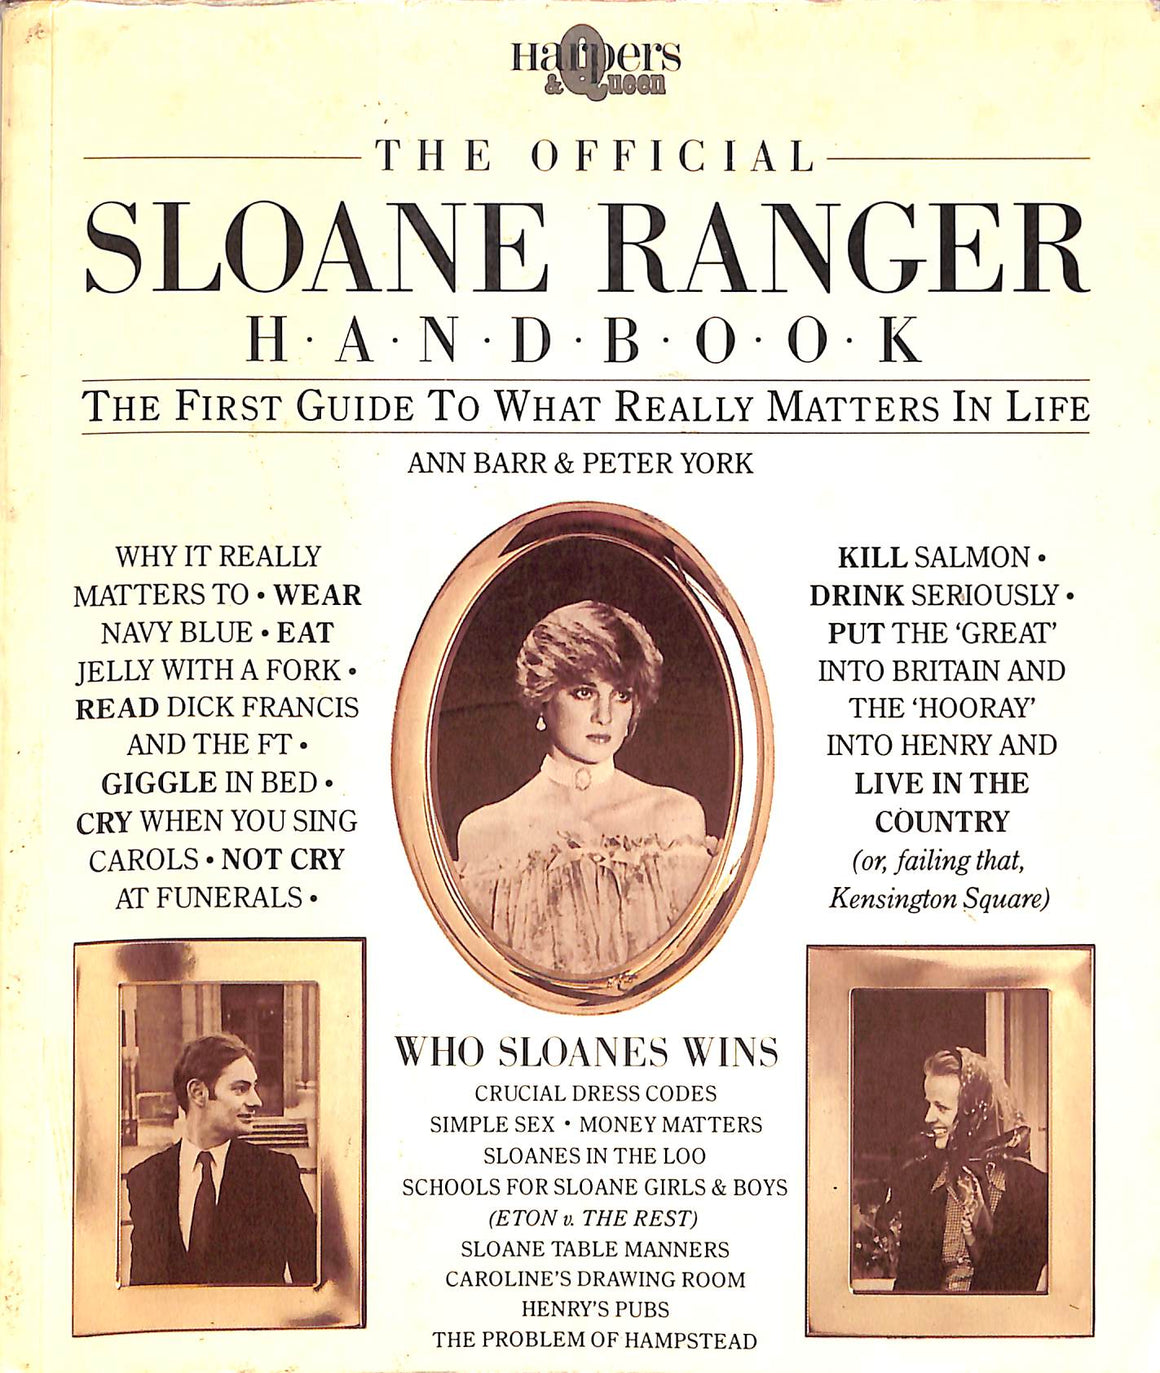 "The Official Sloane Ranger Handbook The First Guide To What Really Matters In Life" 1983 BARR, Ann & YORK, Peter